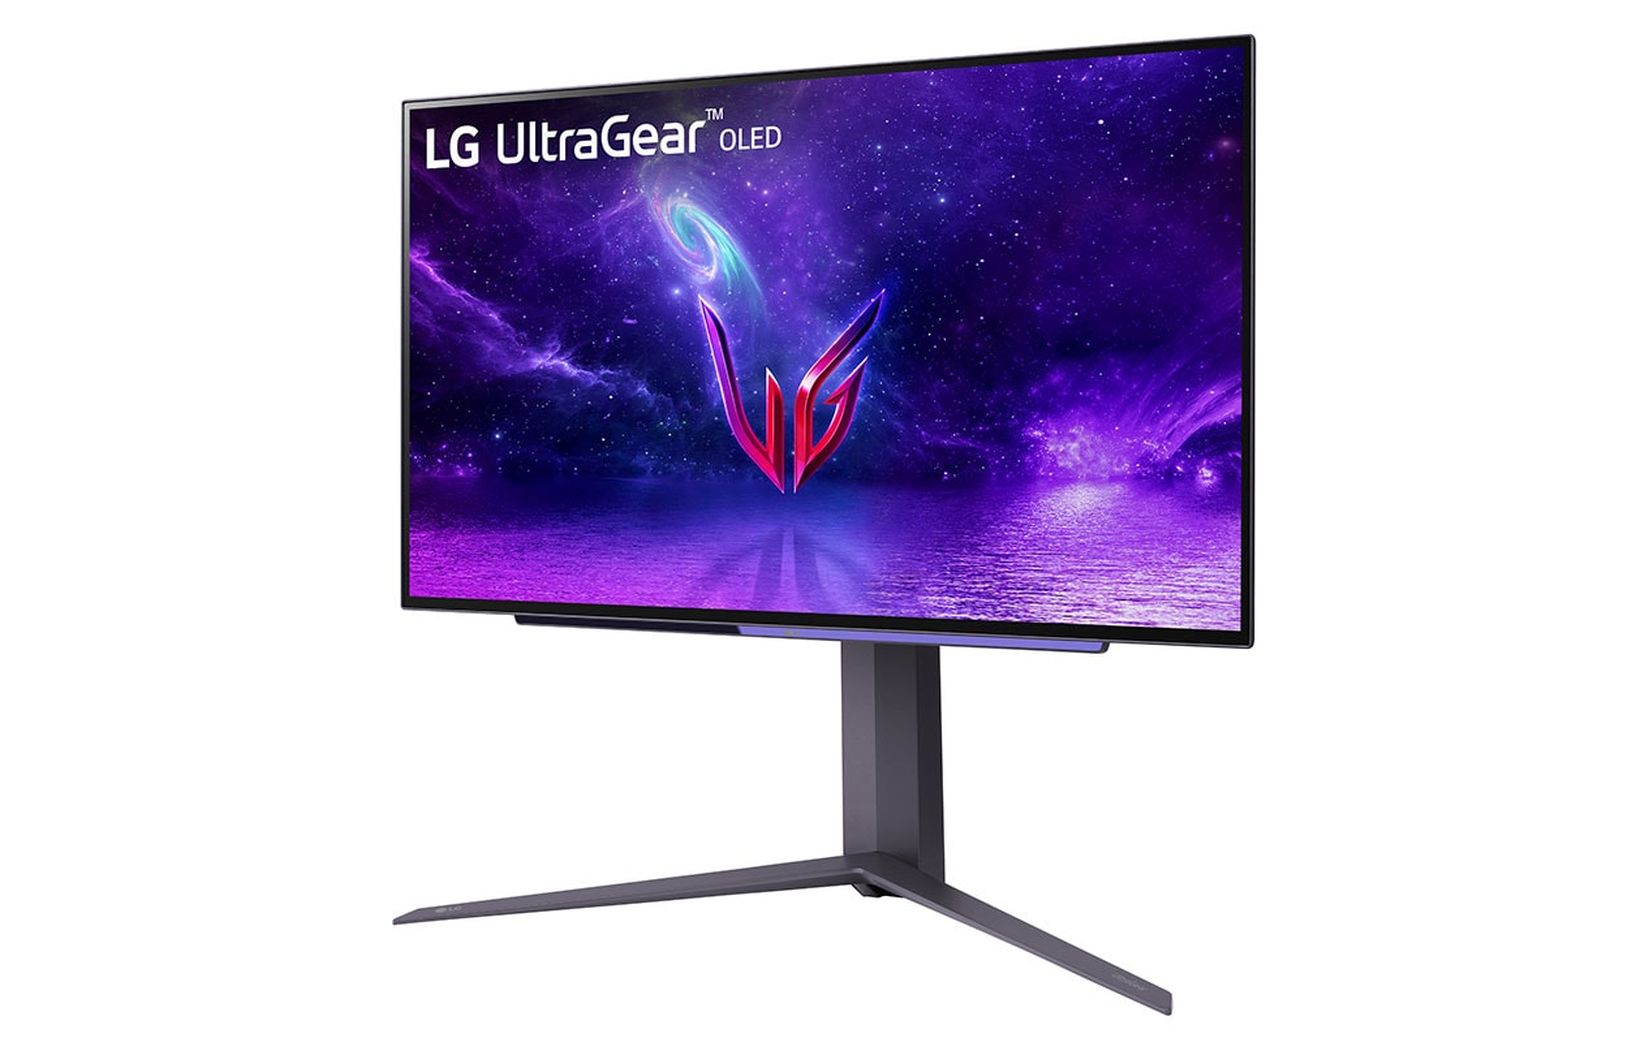 LG ULTRAGEAR UNVEILS WORLD'S FIRST 4K OLED GAMING MONITOR WITH DUAL-HZ  FEATURE